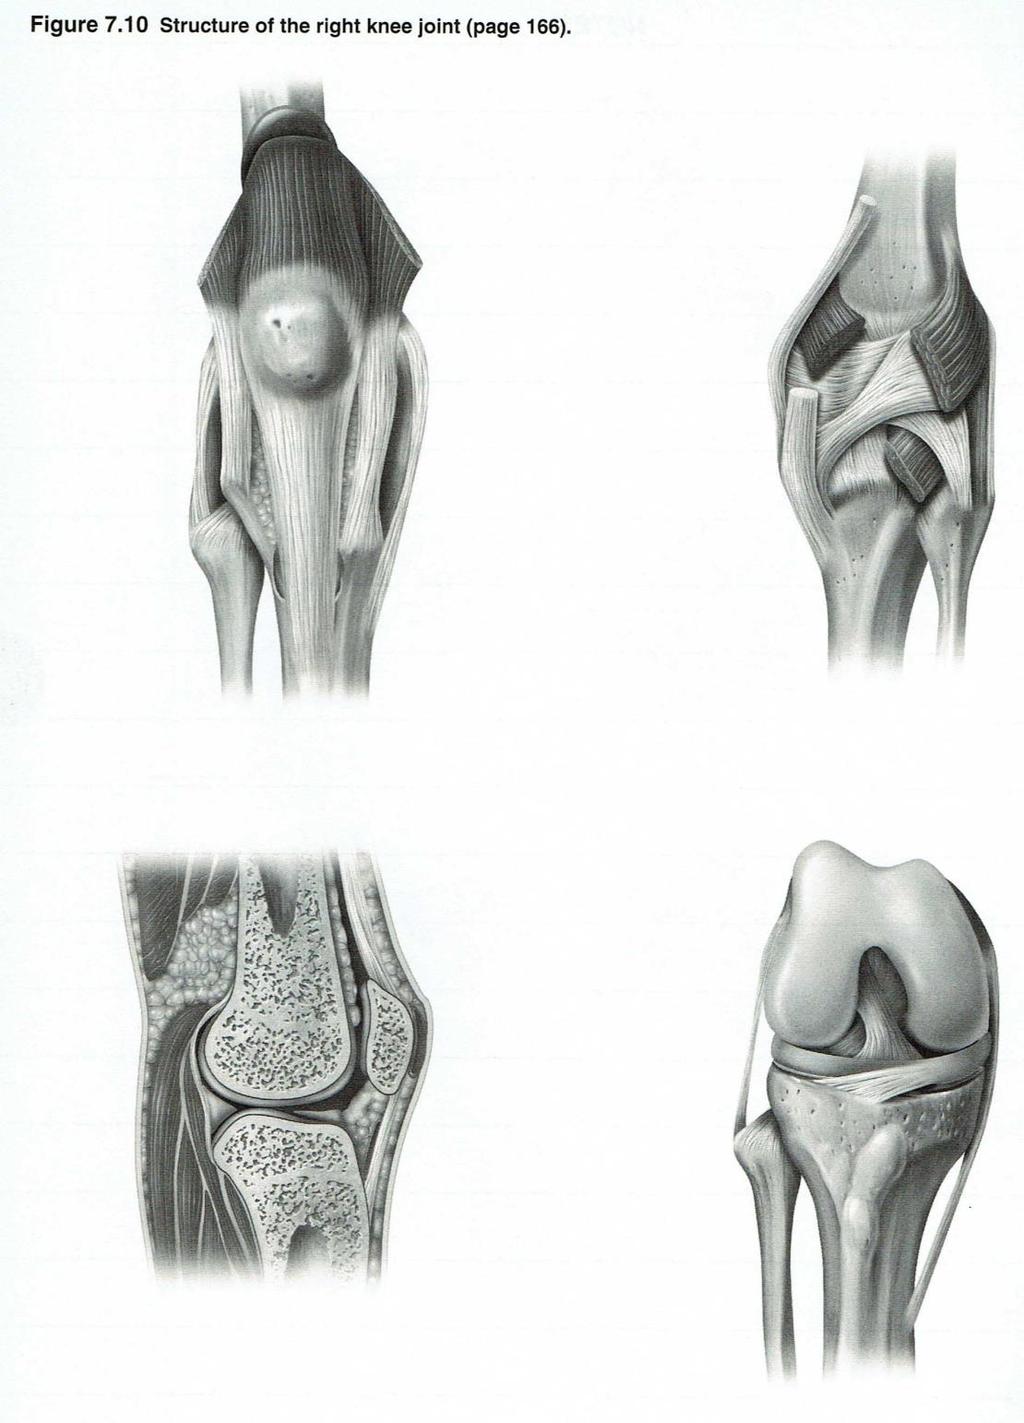 Checkpoint 7. Where in the body can each subtype of synovial joint be found? Figure 7.